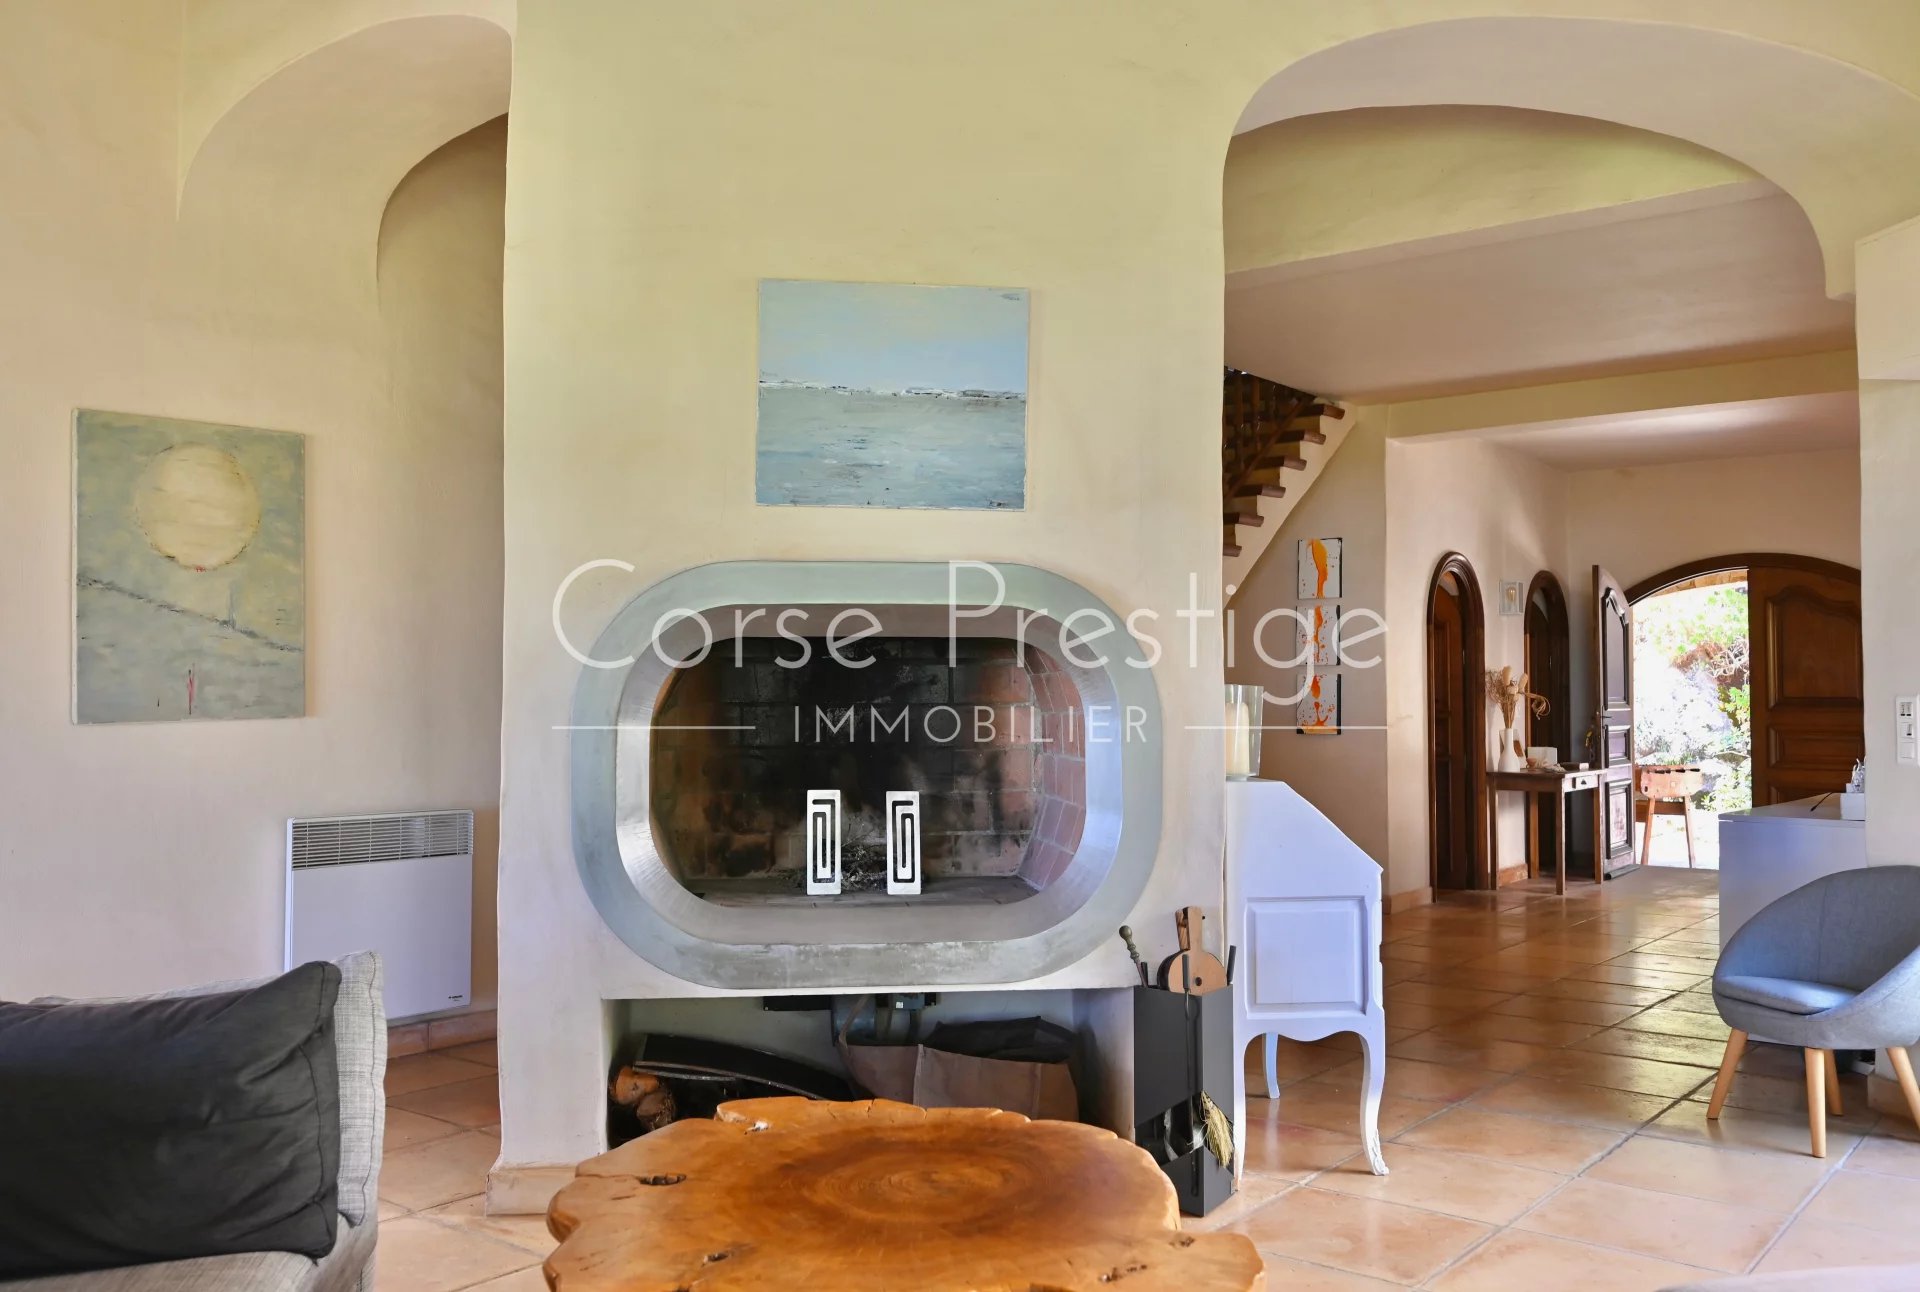 large family villa with beautiful sea view to rent in south corsica - ajaccio image5